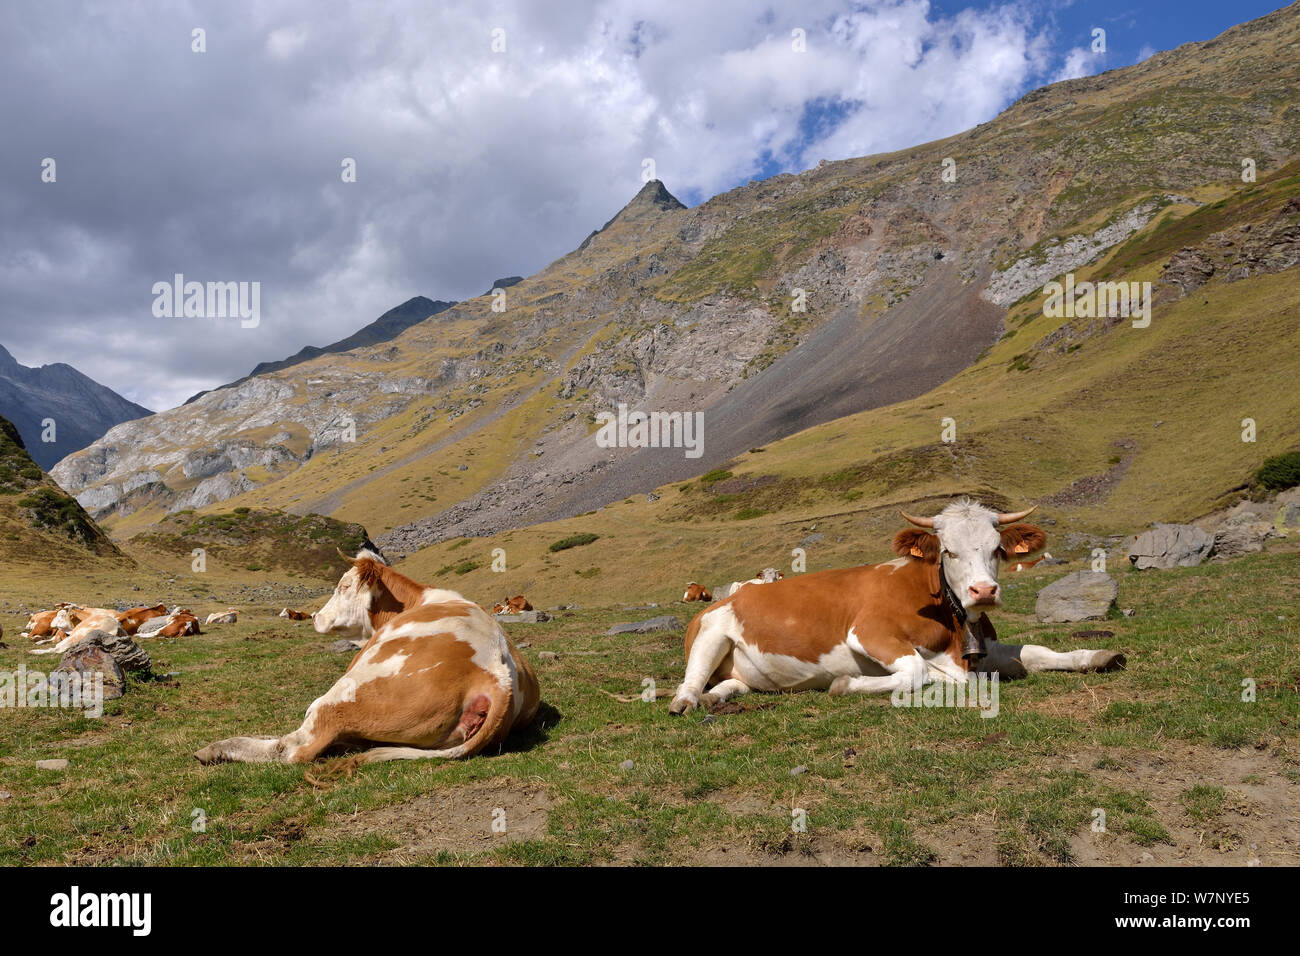 Montbaliarde Cattle (Bos taurus) herds in the mountain landscapes. Ossoue valley, French Pyrenees, September. Stock Photo